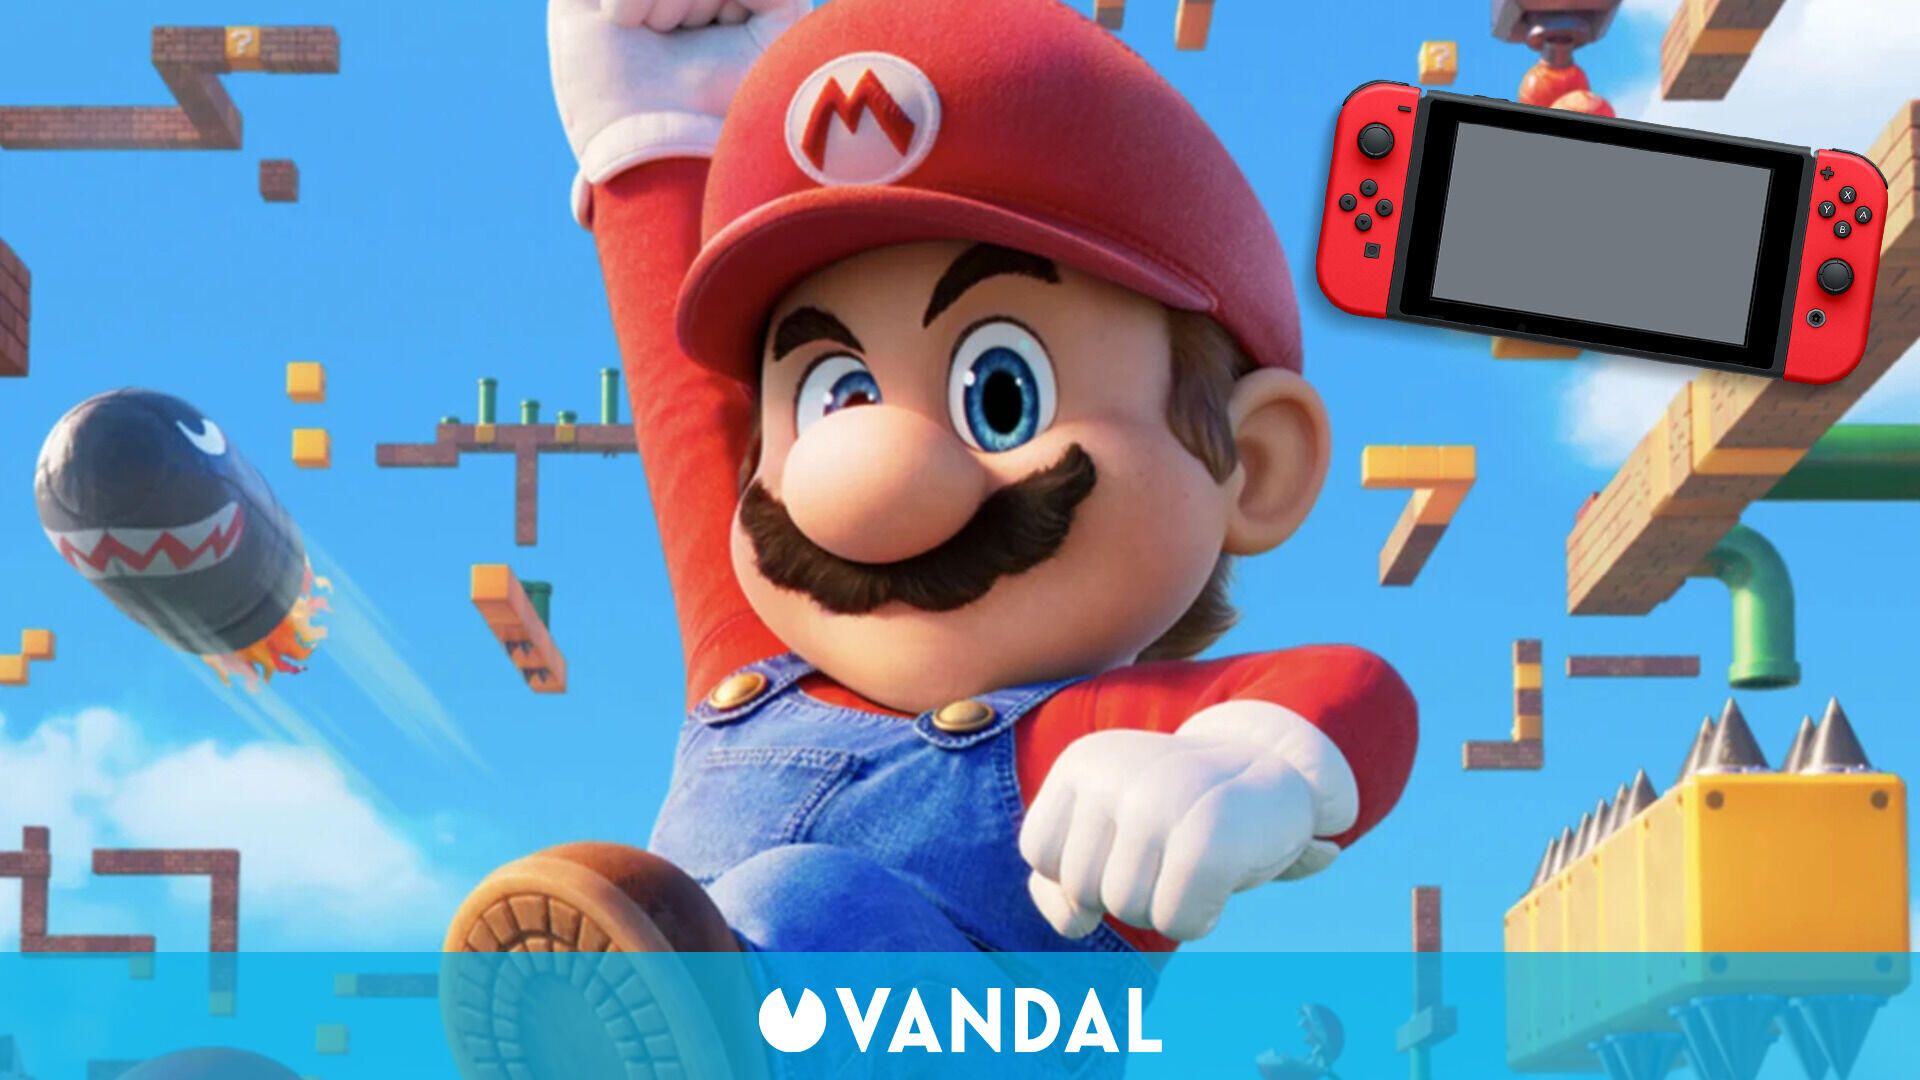 They filter the image of the new Switch bundle with the theme of Super Mario Bros.